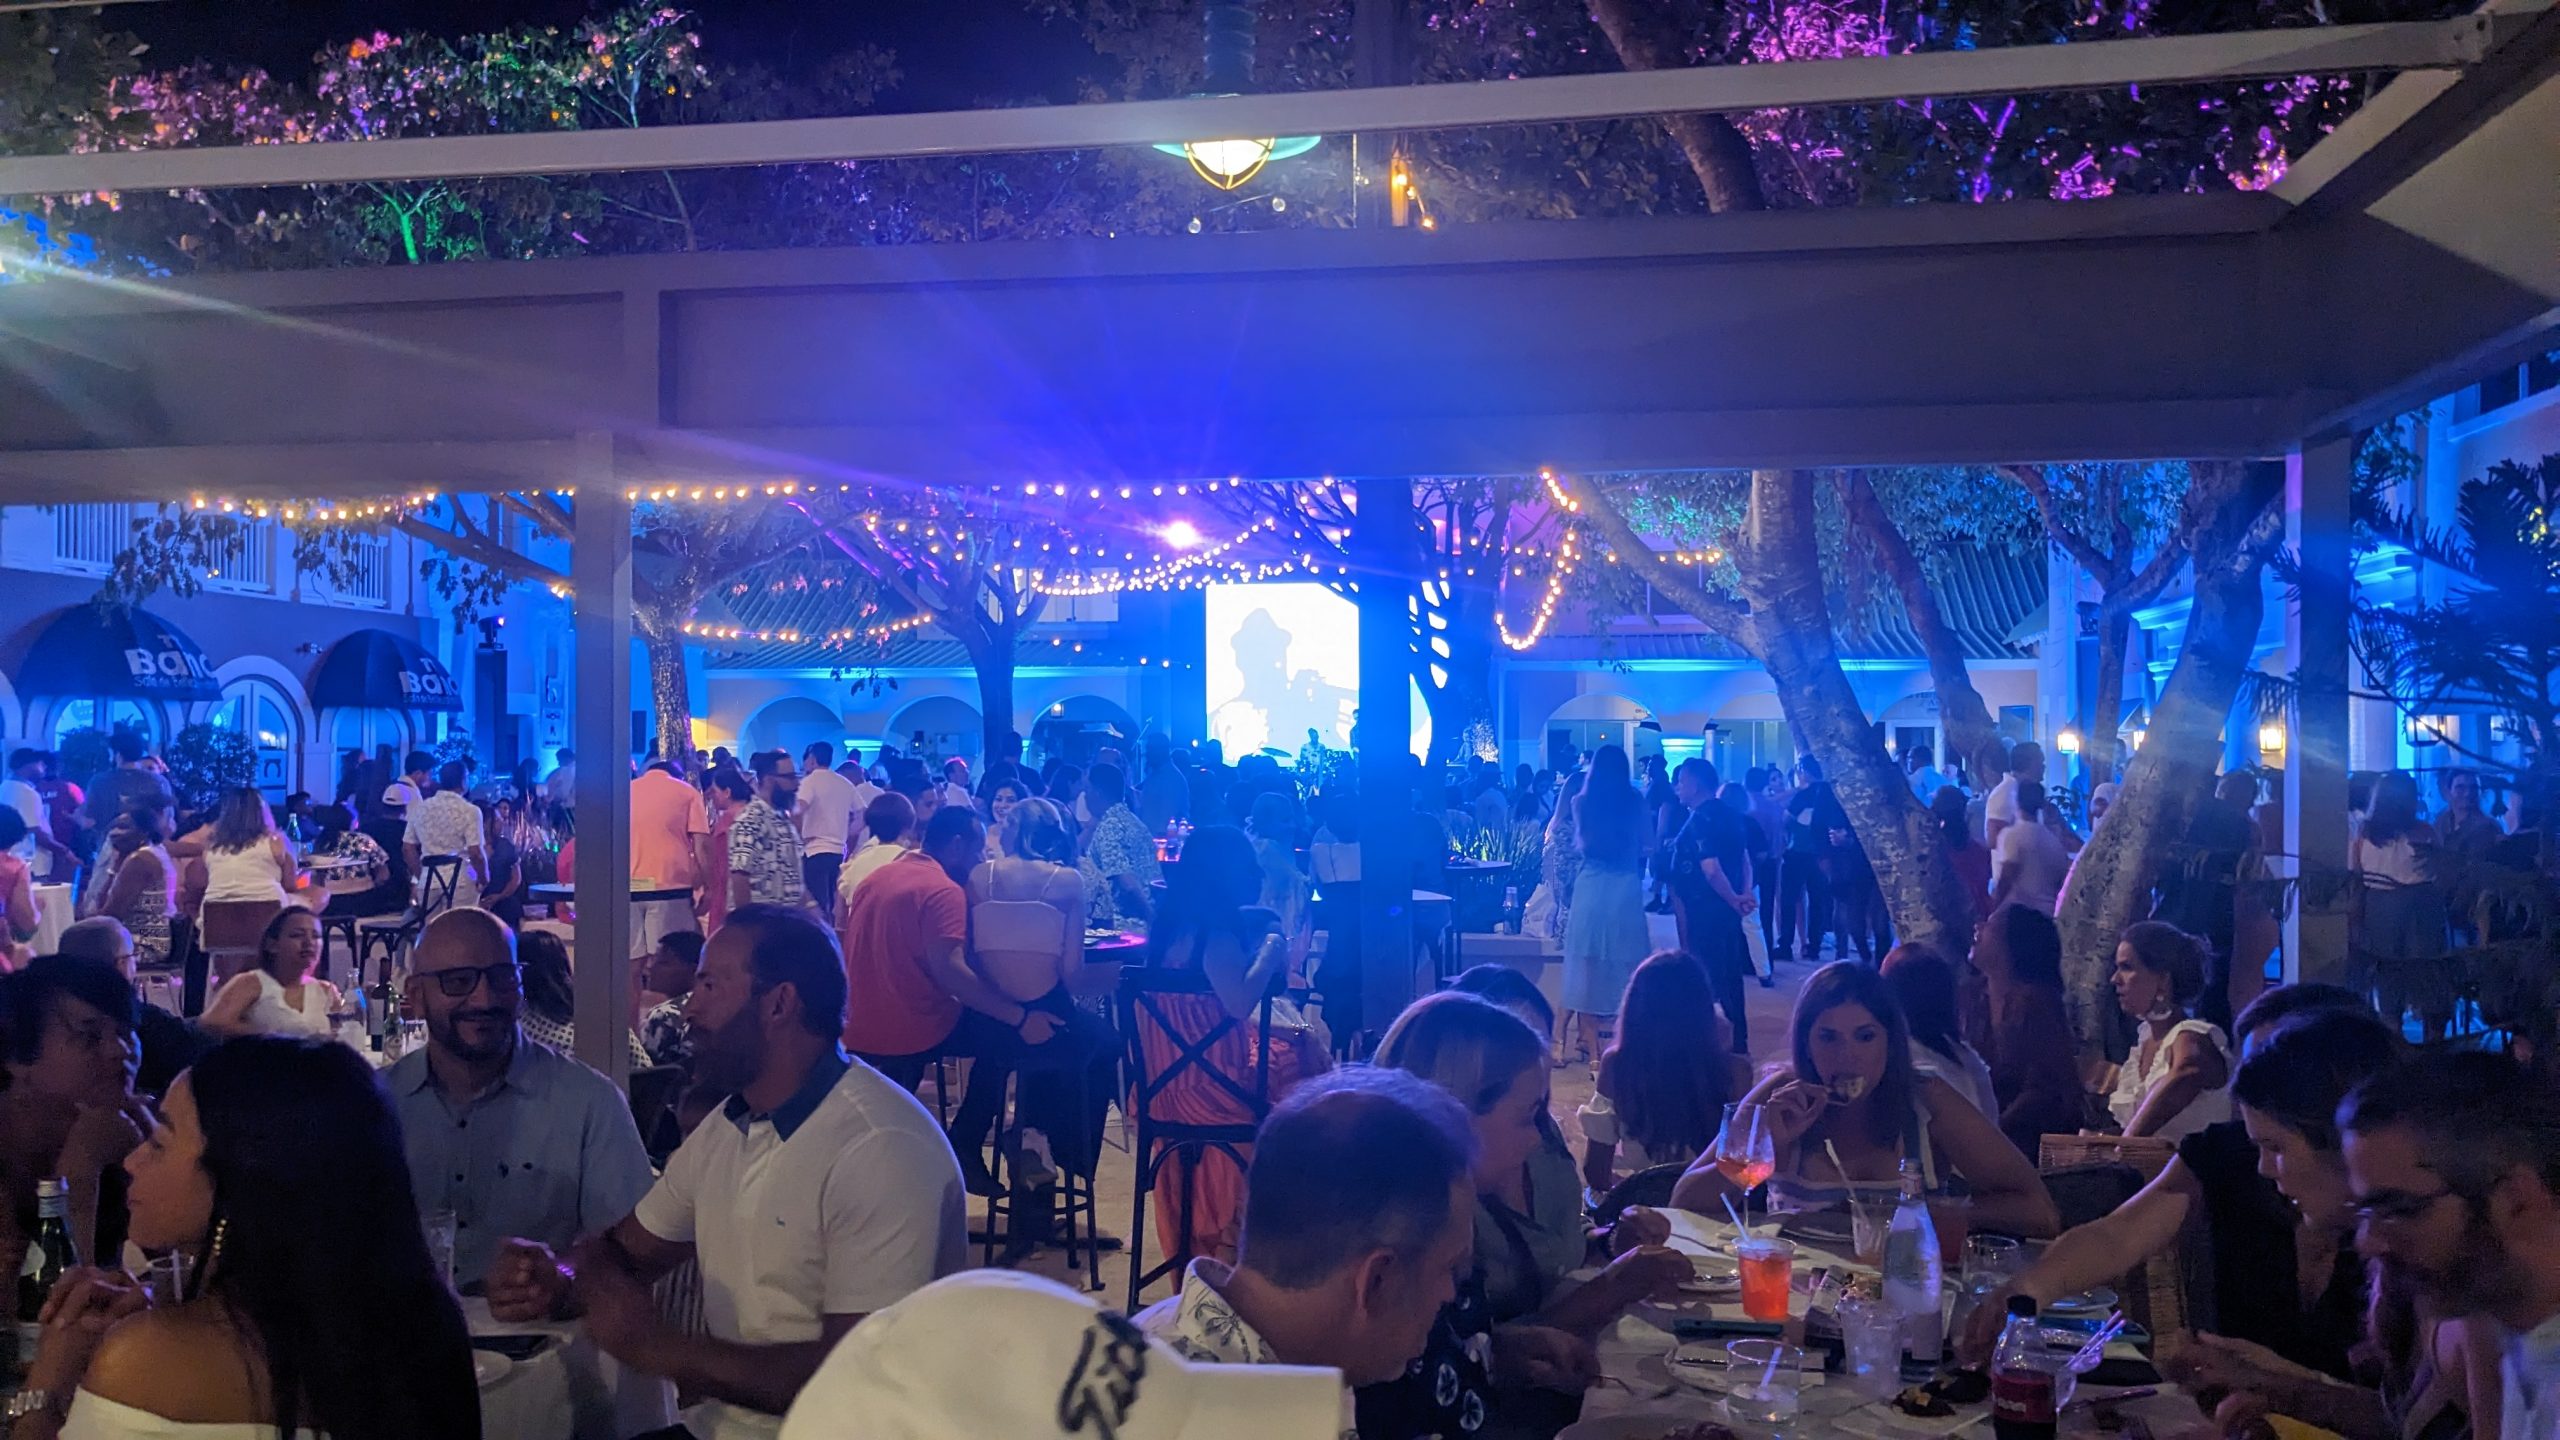 First Jazz Fest held at Punta Cana Village